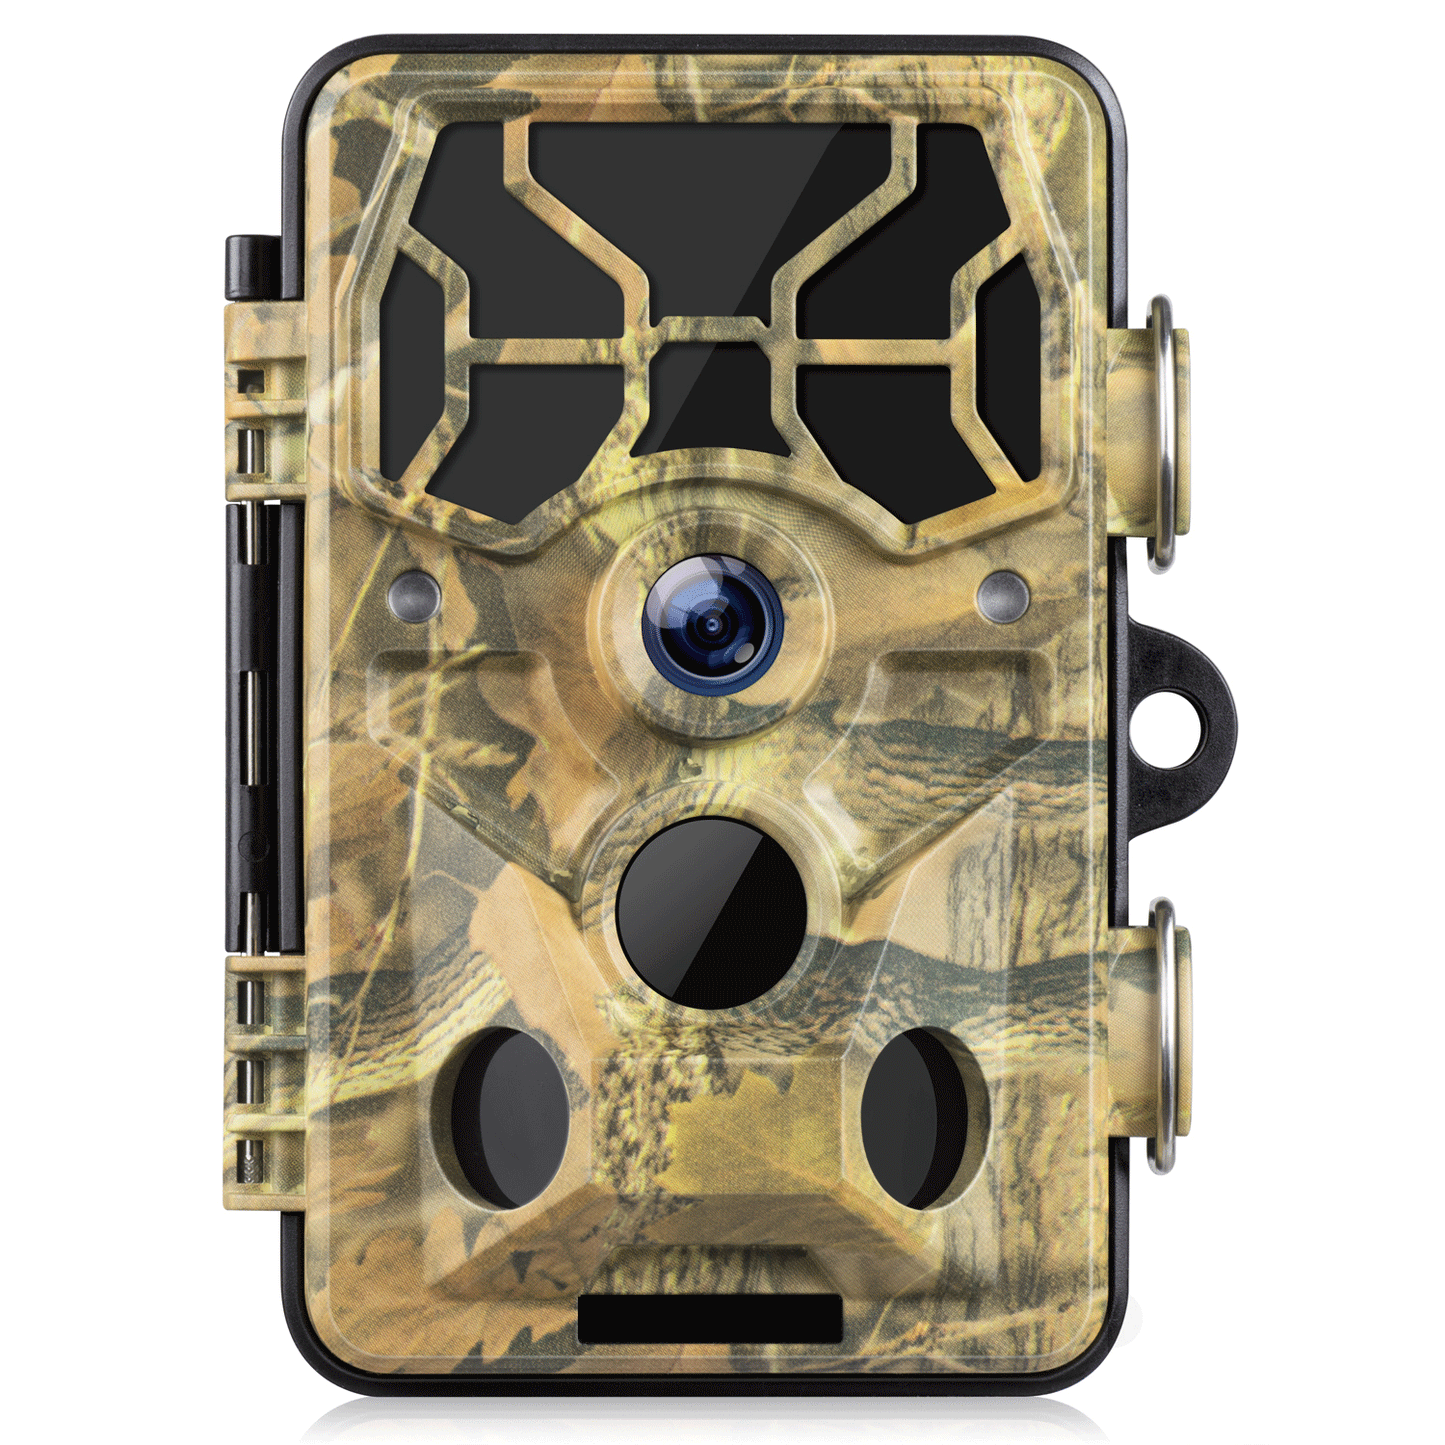 Campark WiFi Trail Camera Bluetooth Hunting Game Camera Outdoor Wildlife Monitoring Night Vision Waterproof 20MP